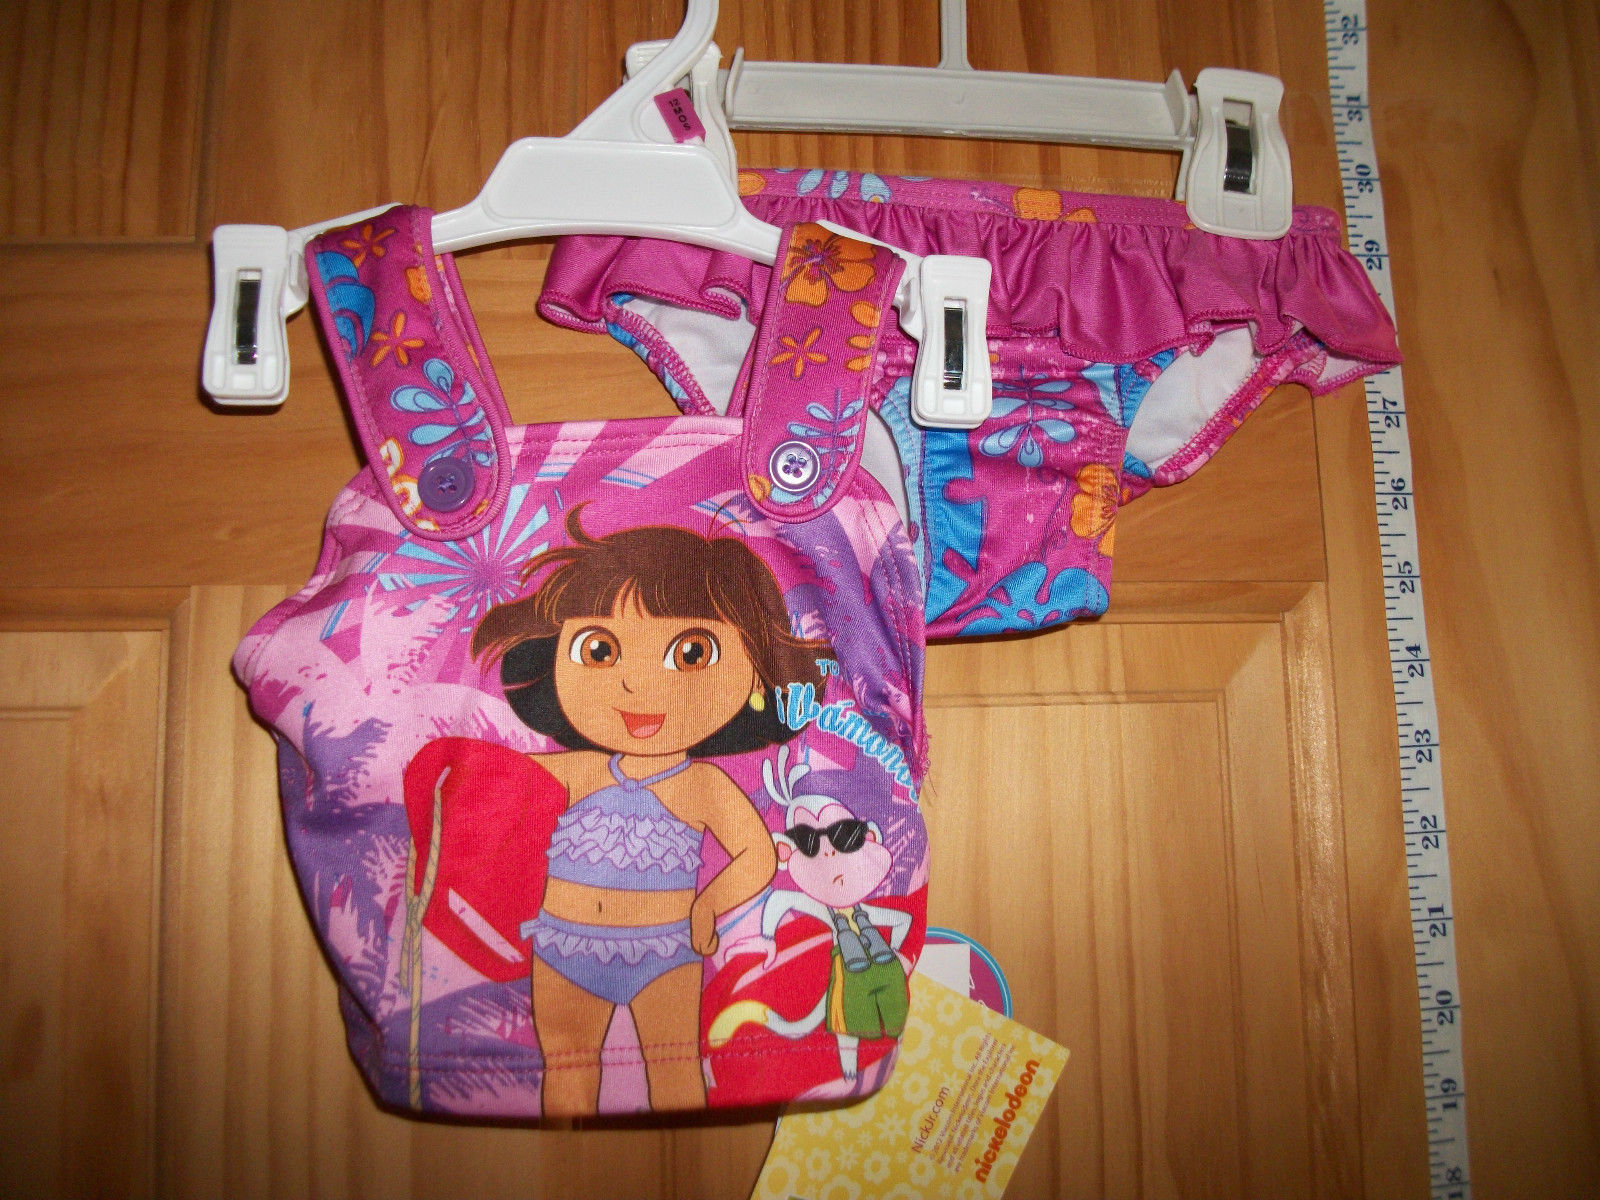 Dora The Explorer Baby Clothes 12M Infant and 50 similar items